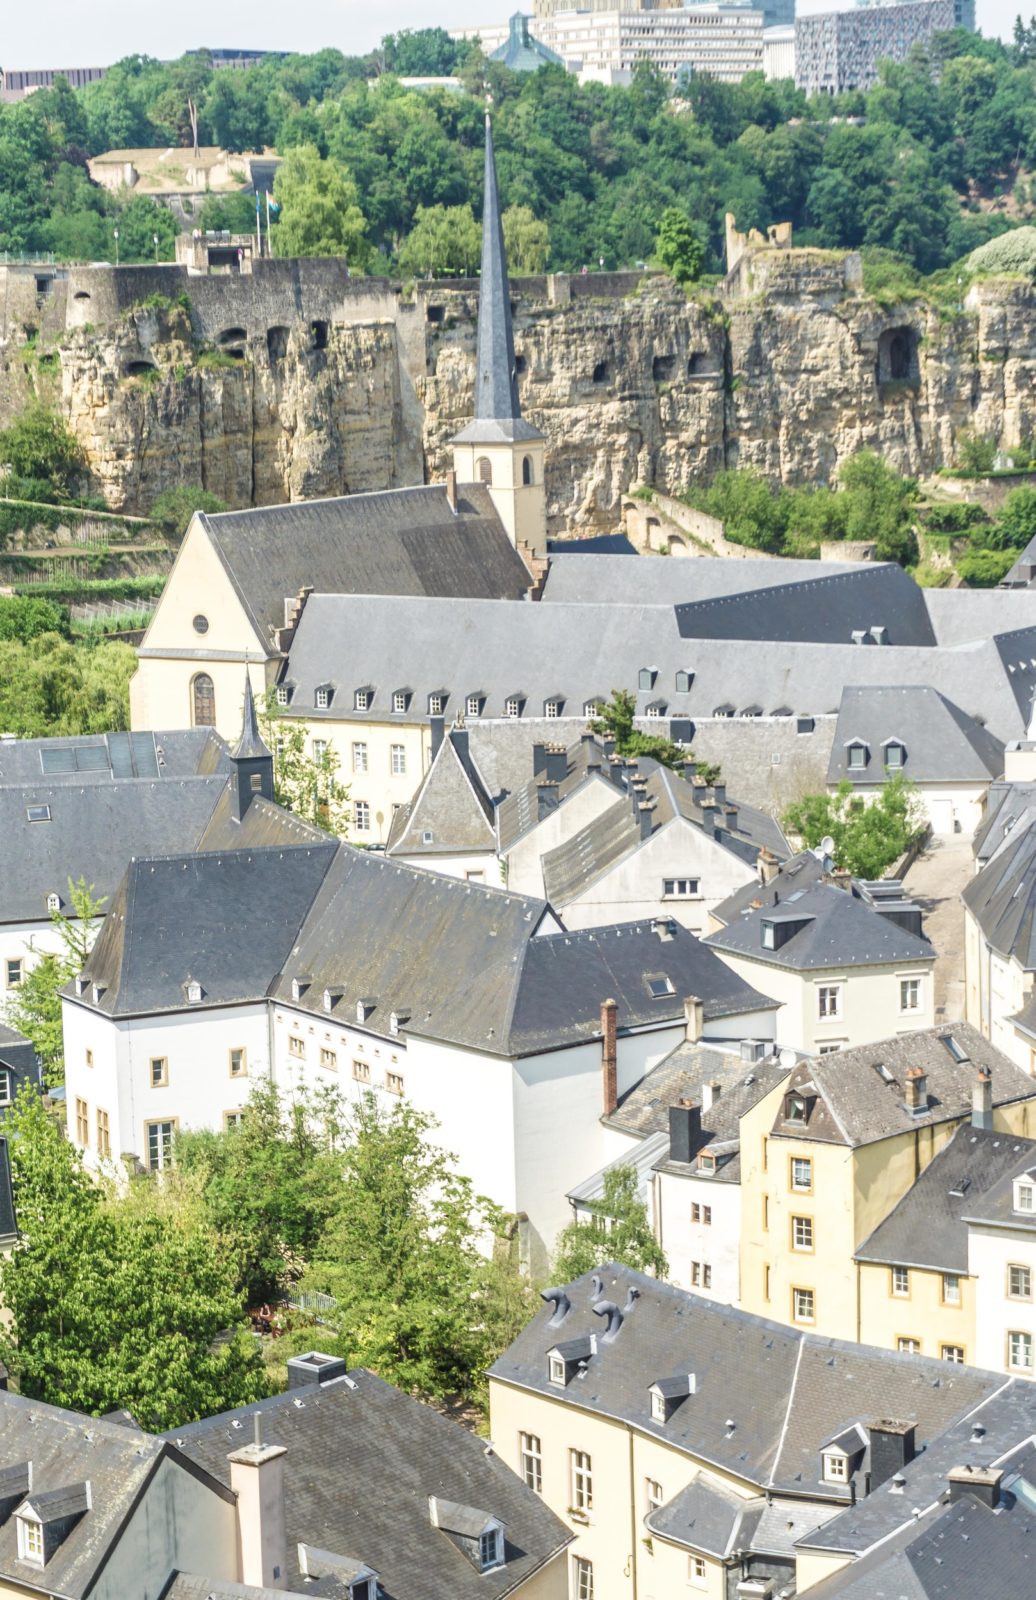 Things to see and do in Luxembourg